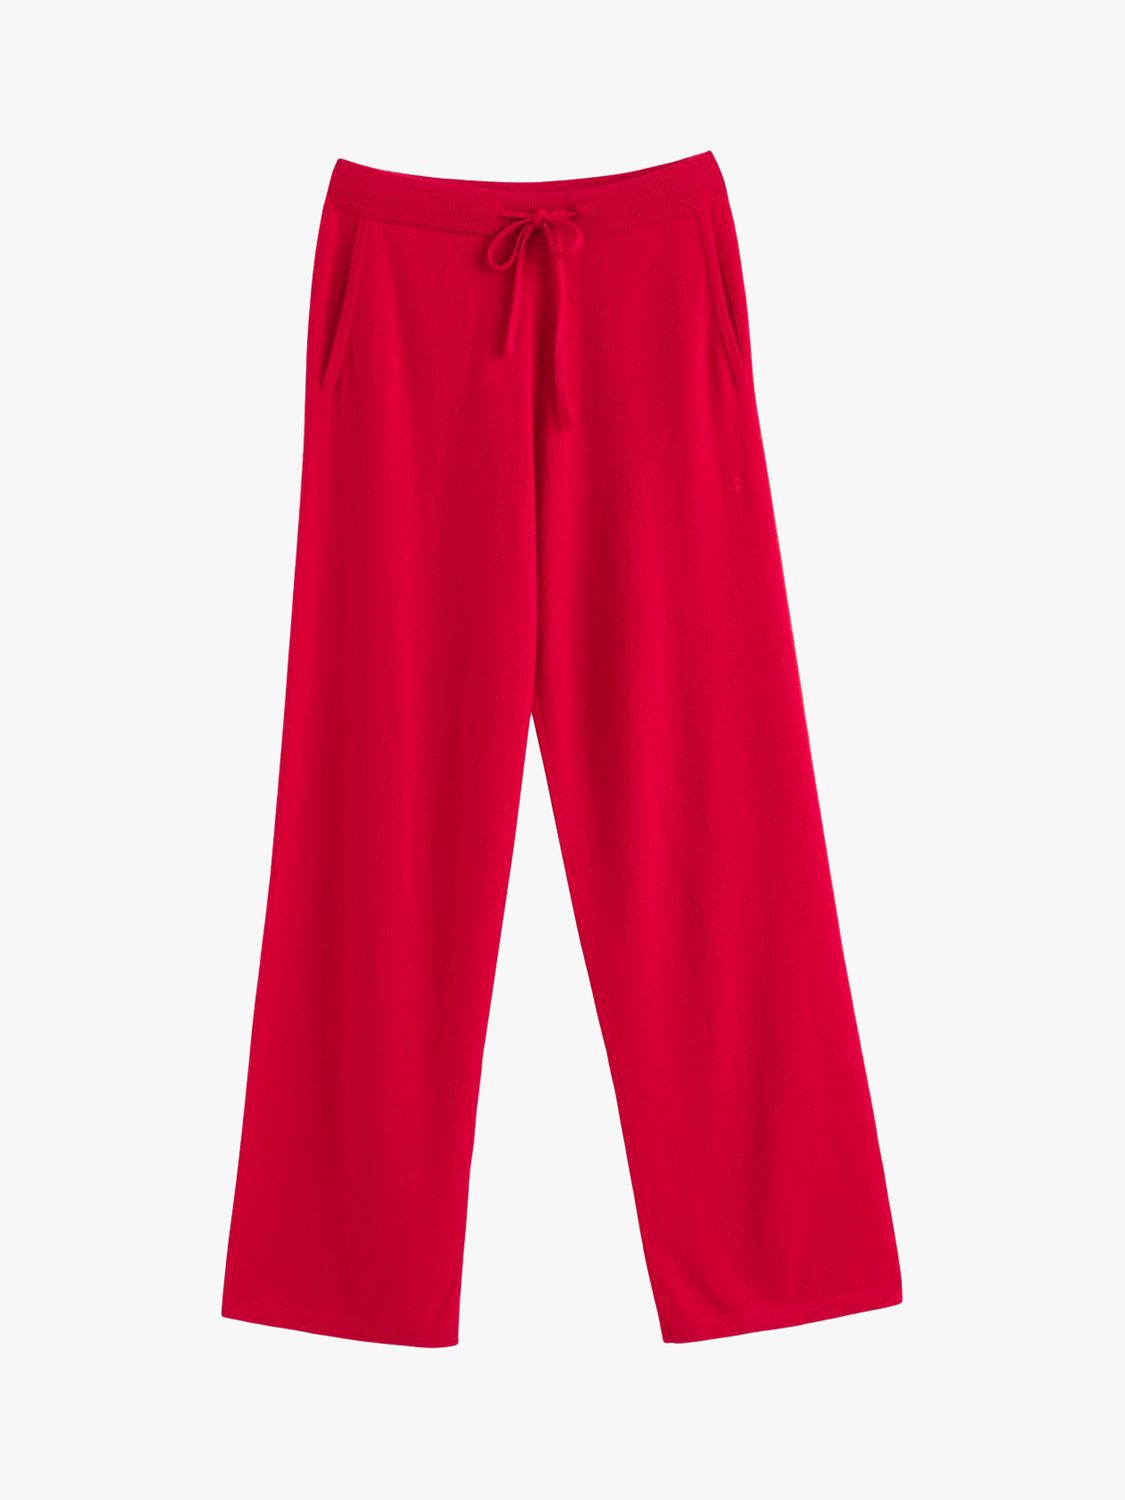 Chinti & Parker Cashmere Wide Leg Trousers, Red, XXL